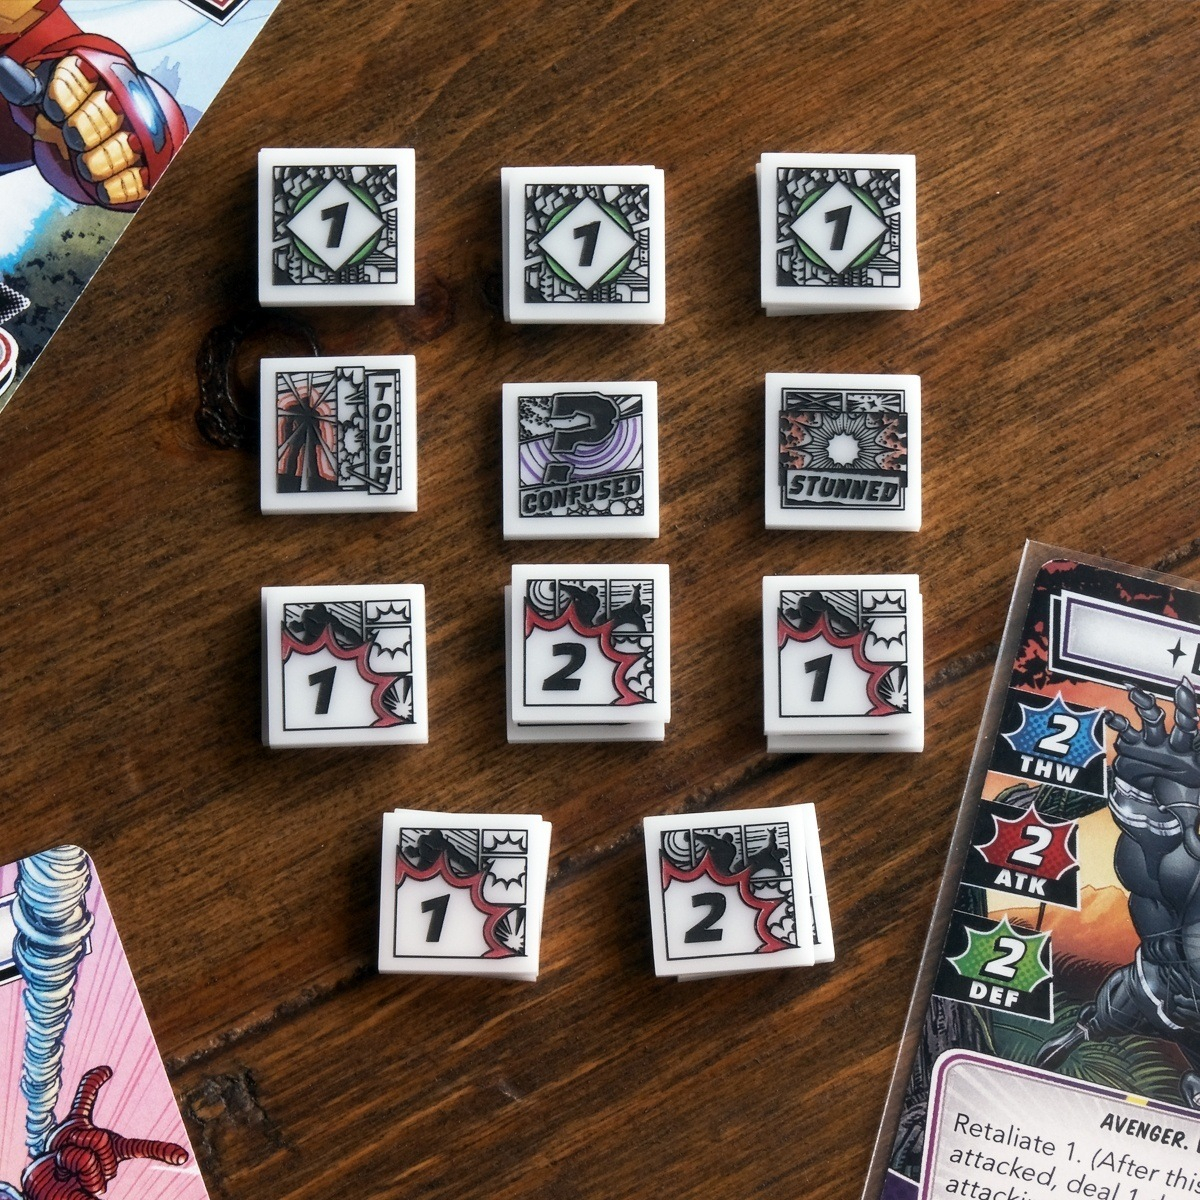 Full set of Hero Cosmic Tokens displayed on a wooden table and surrounded by cards from Marvel Champions LCG